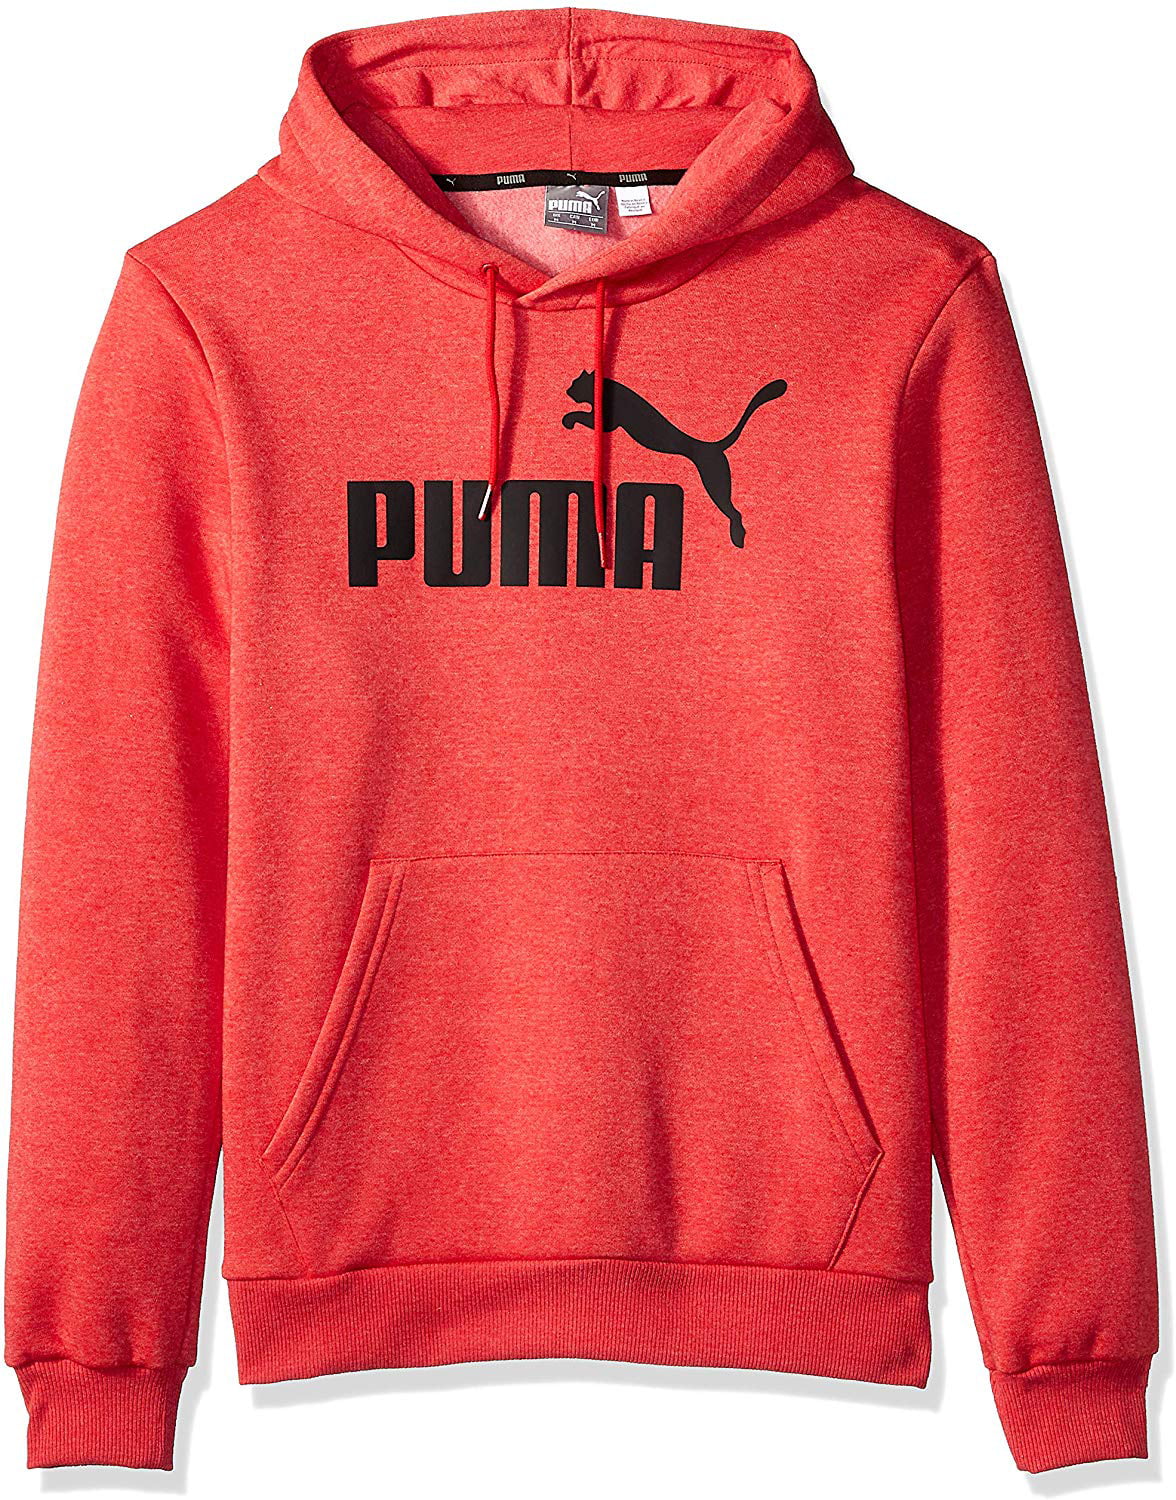 Puma Sweaters - Mens Sweater Ribbon Large Logo-Graphic Pullover Hooded ...